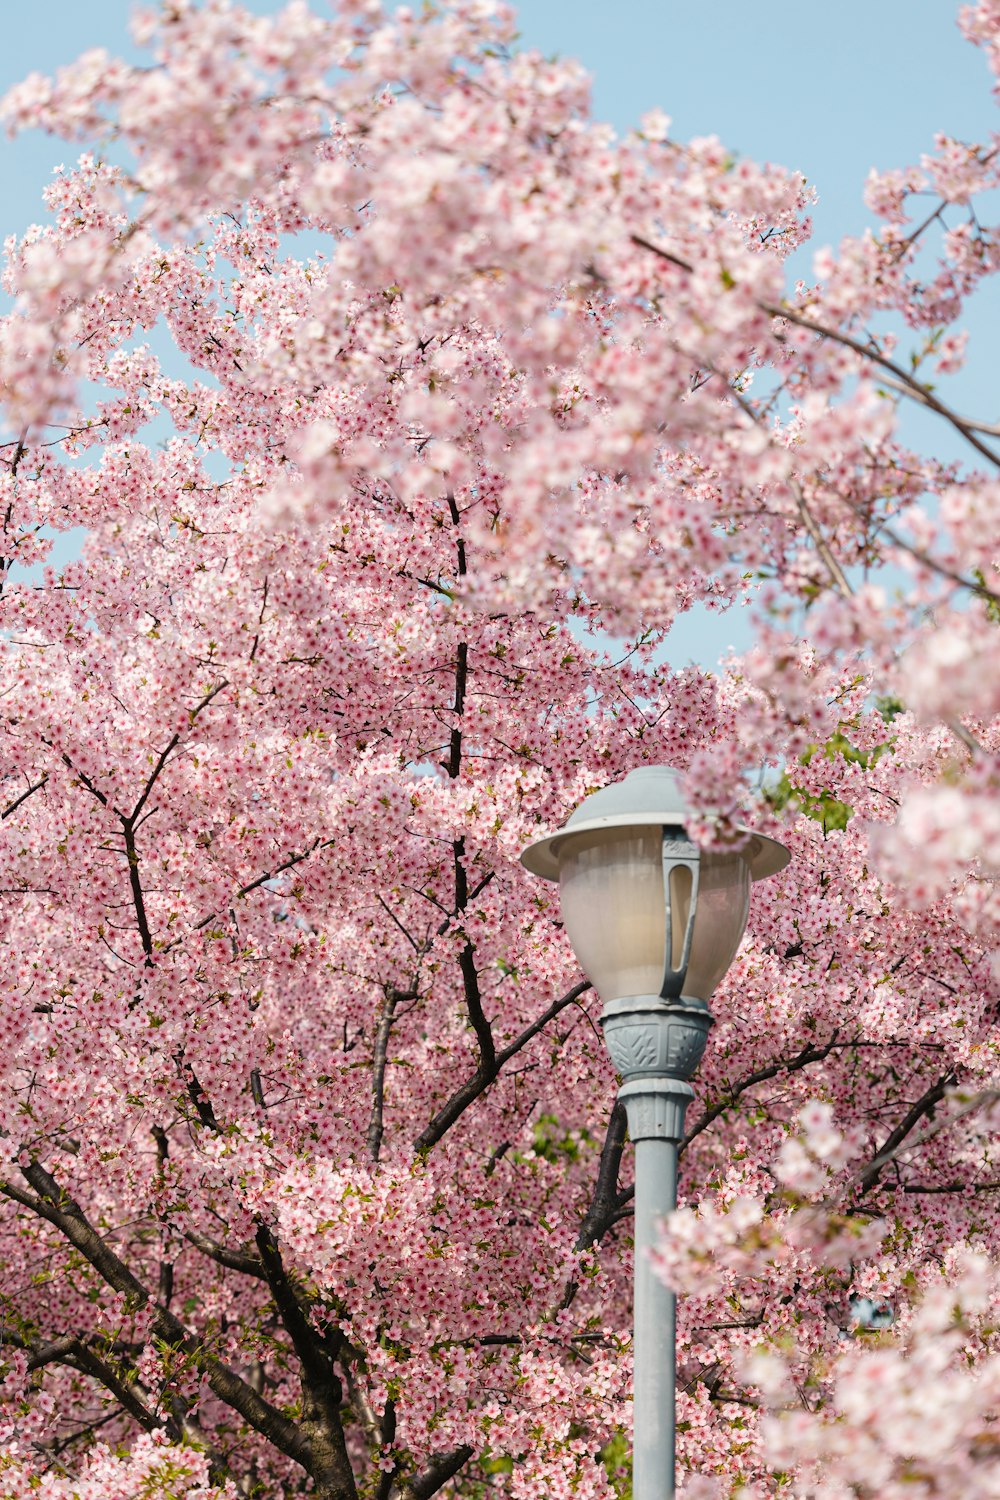 a street light in front of a flowering tree